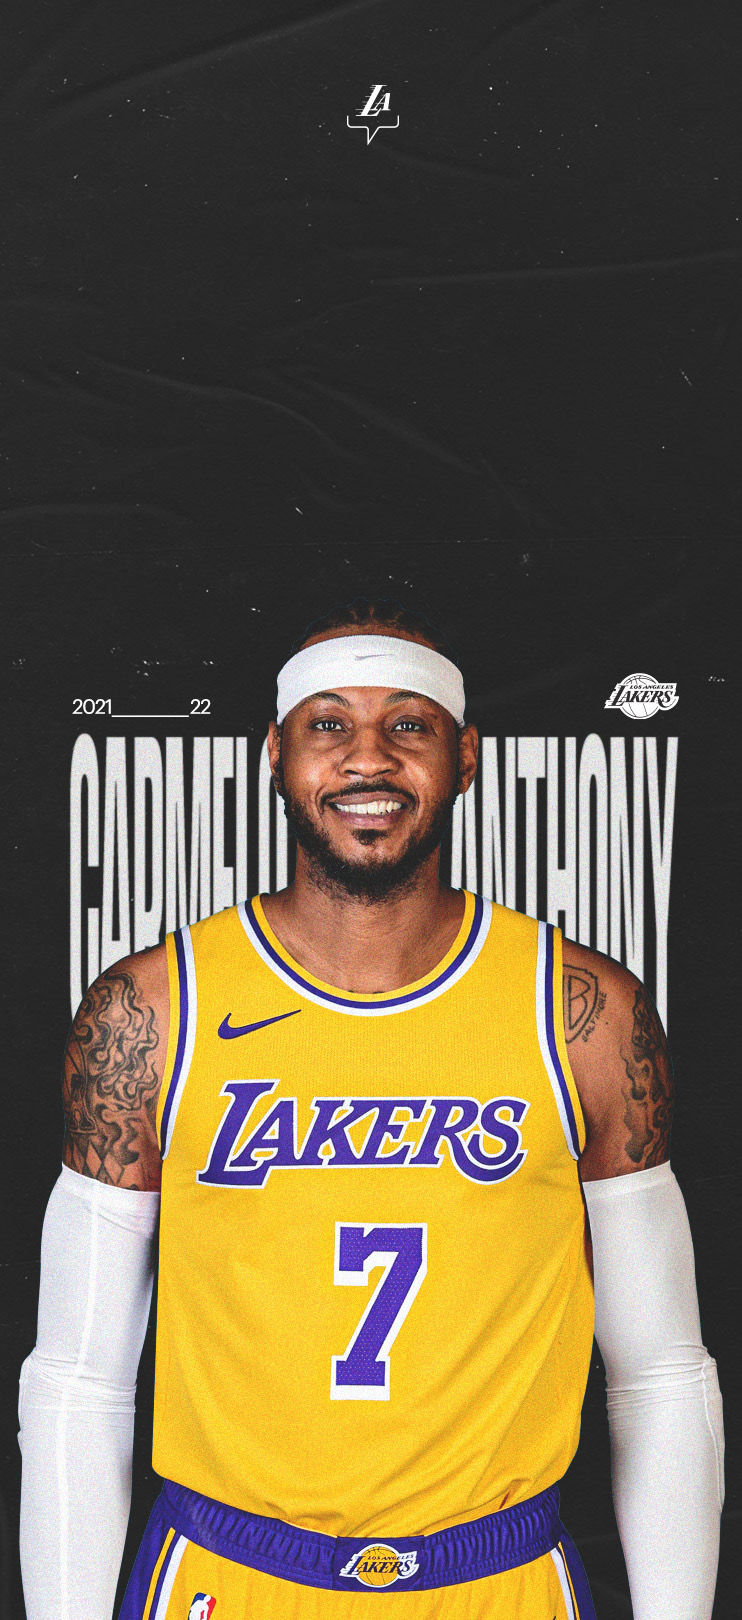 Carmelo Anthony on Instagram: “@lakers #STAYME7O”